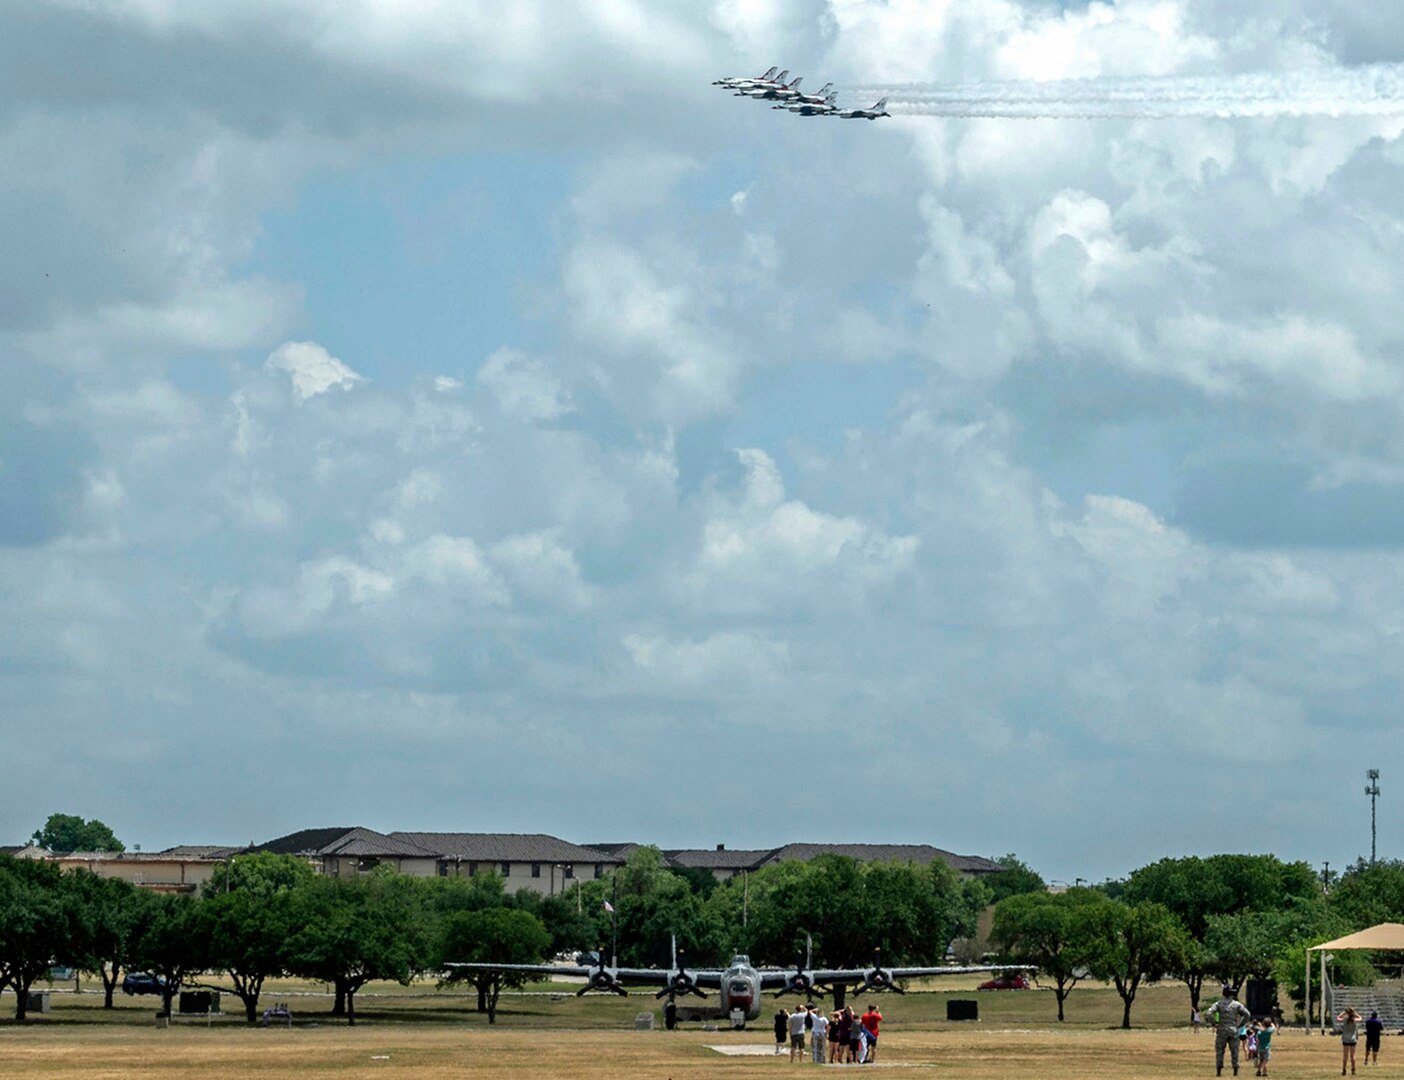 The United States Air Force Air Demonstration Squadron “Thunderbirds” perform a flyover at Joint Base San Antonio-Lackland during their America Strong salute May 13.